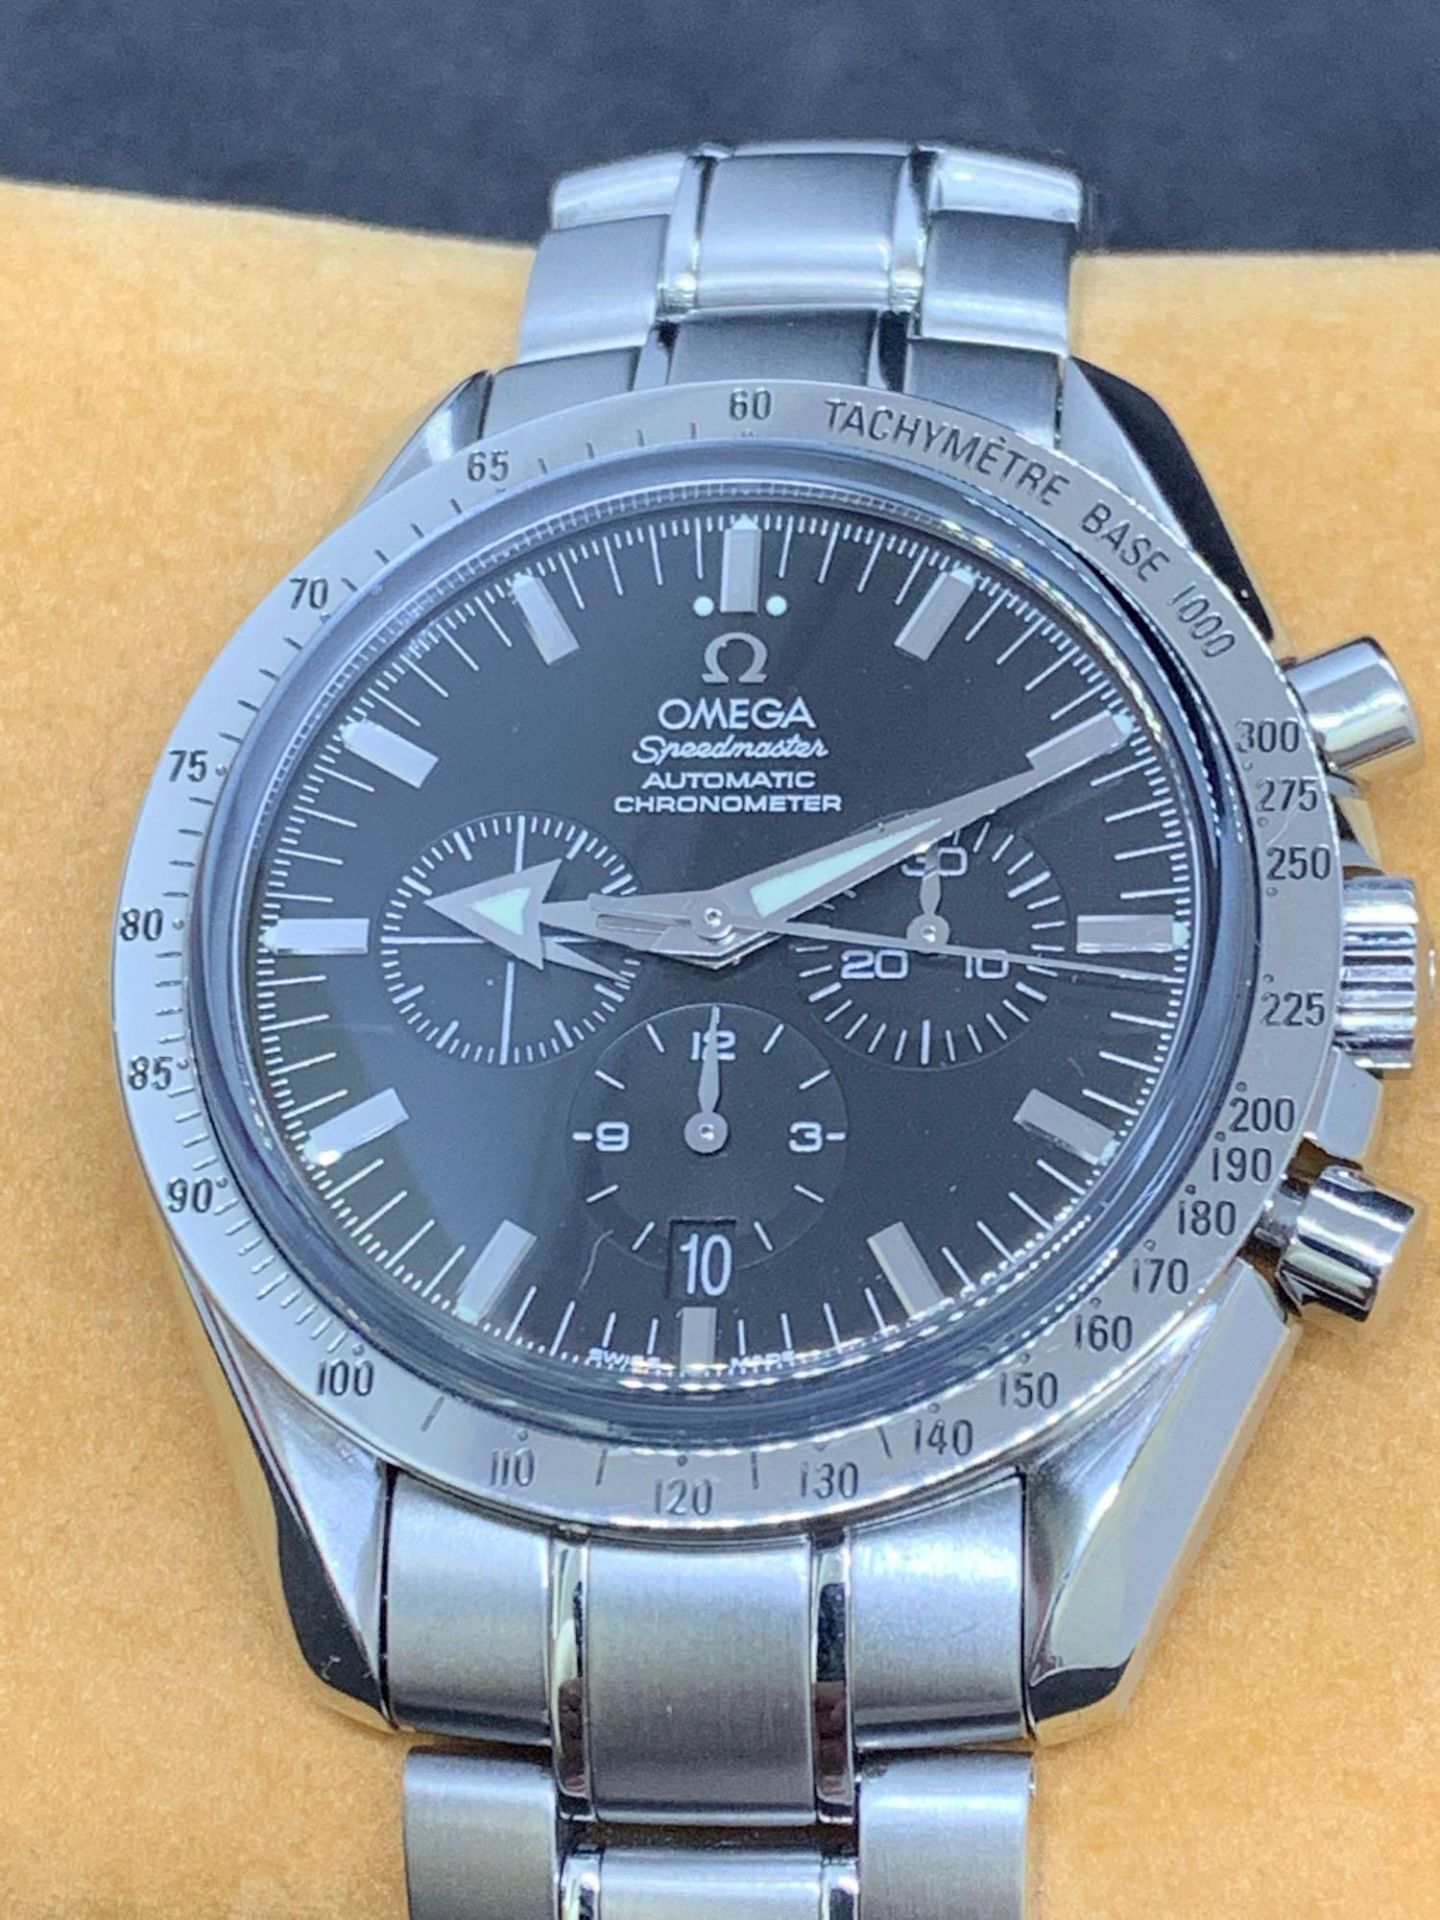 40mm Omega Speedmaster Chrono Watch Stainless steel - Image 2 of 7